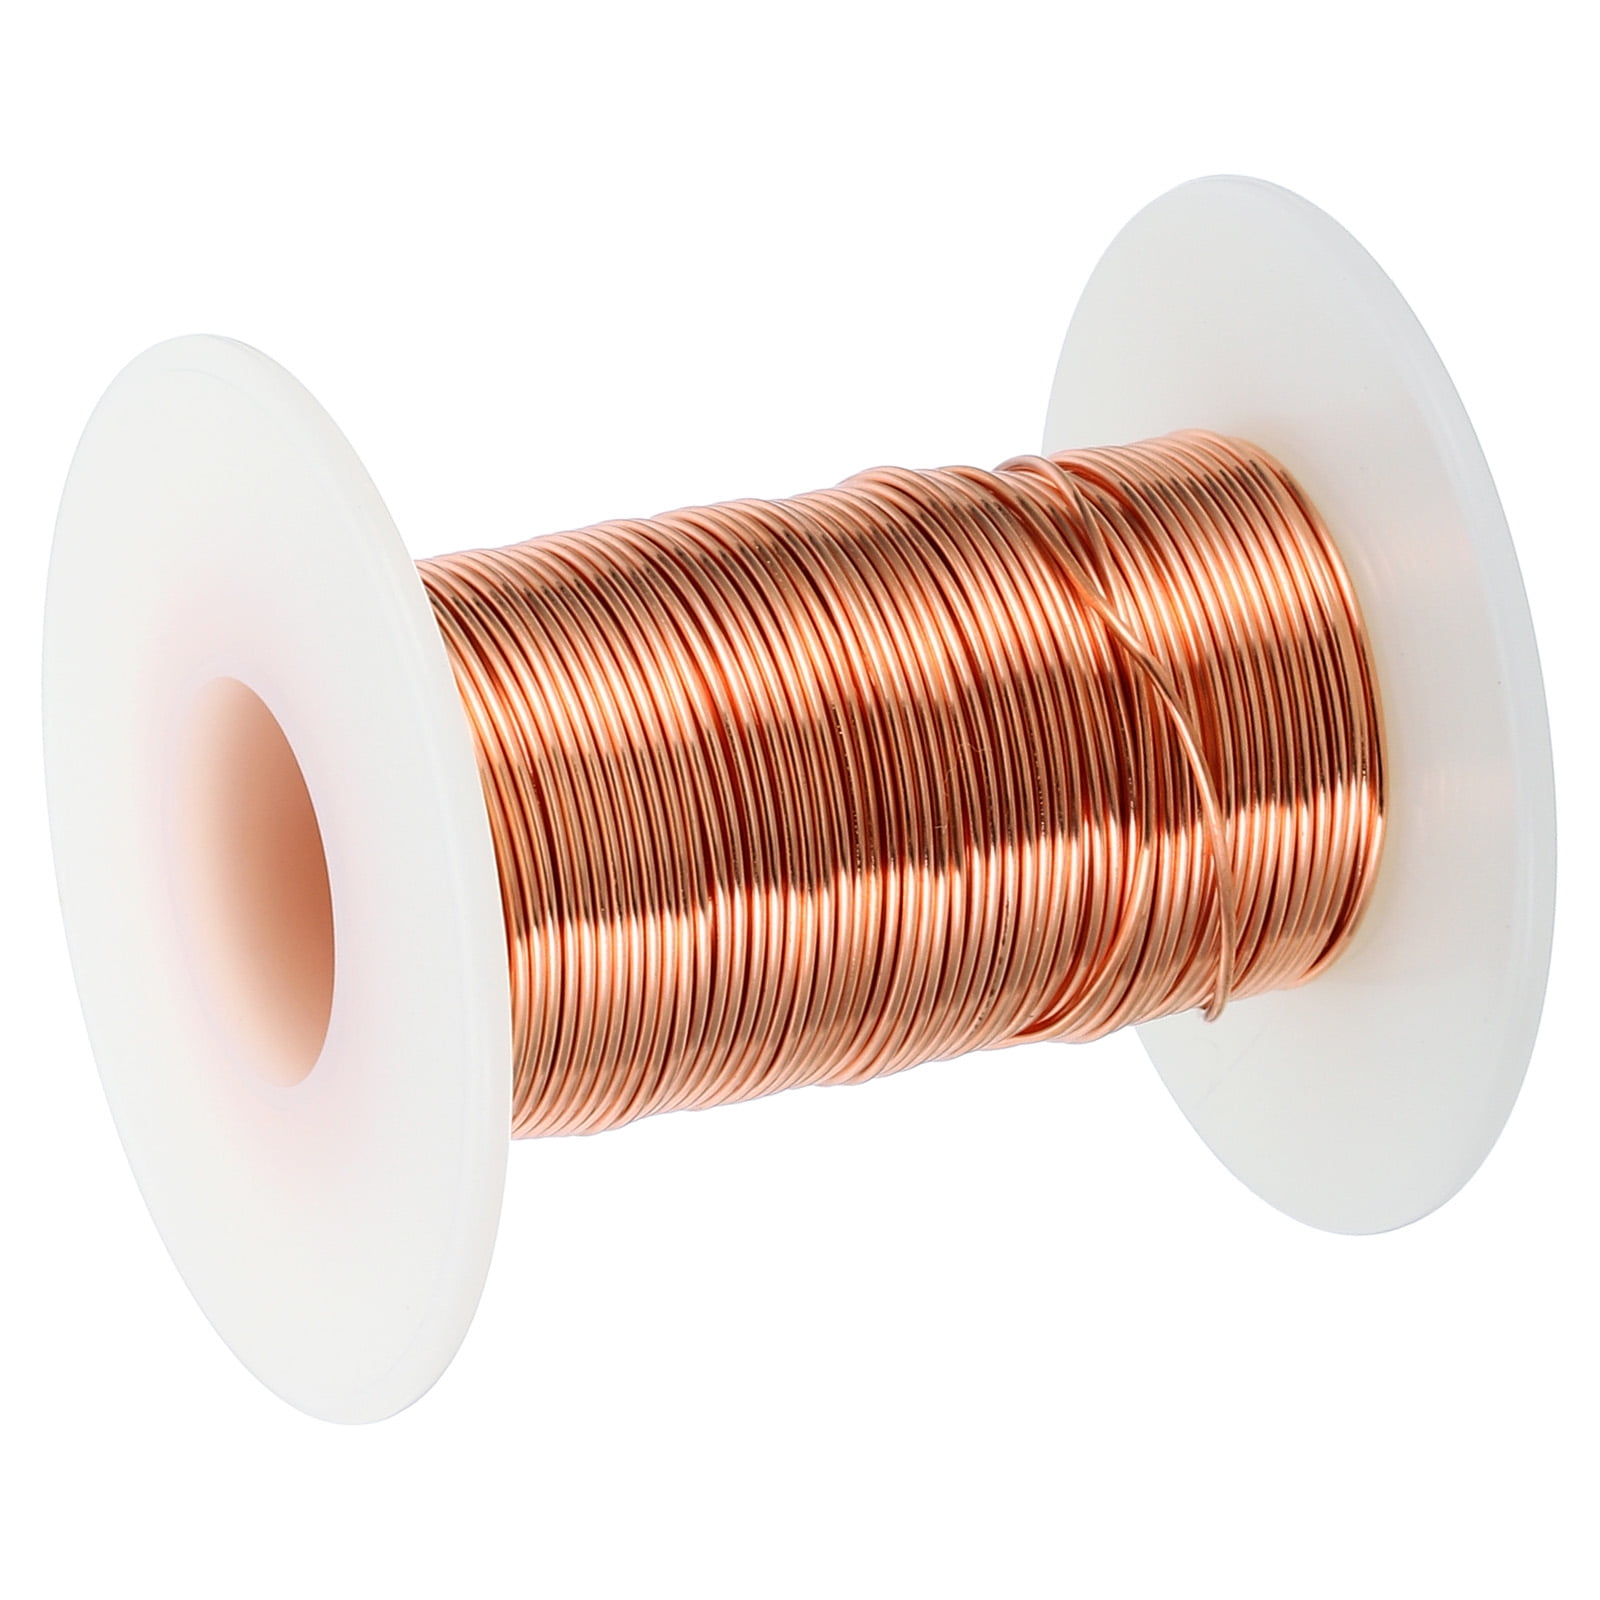 Uxcell Soft Copper Wire, 20Gauge/0.8mm Diameter 10m/32.8ft Spool Pure  Copper Wire